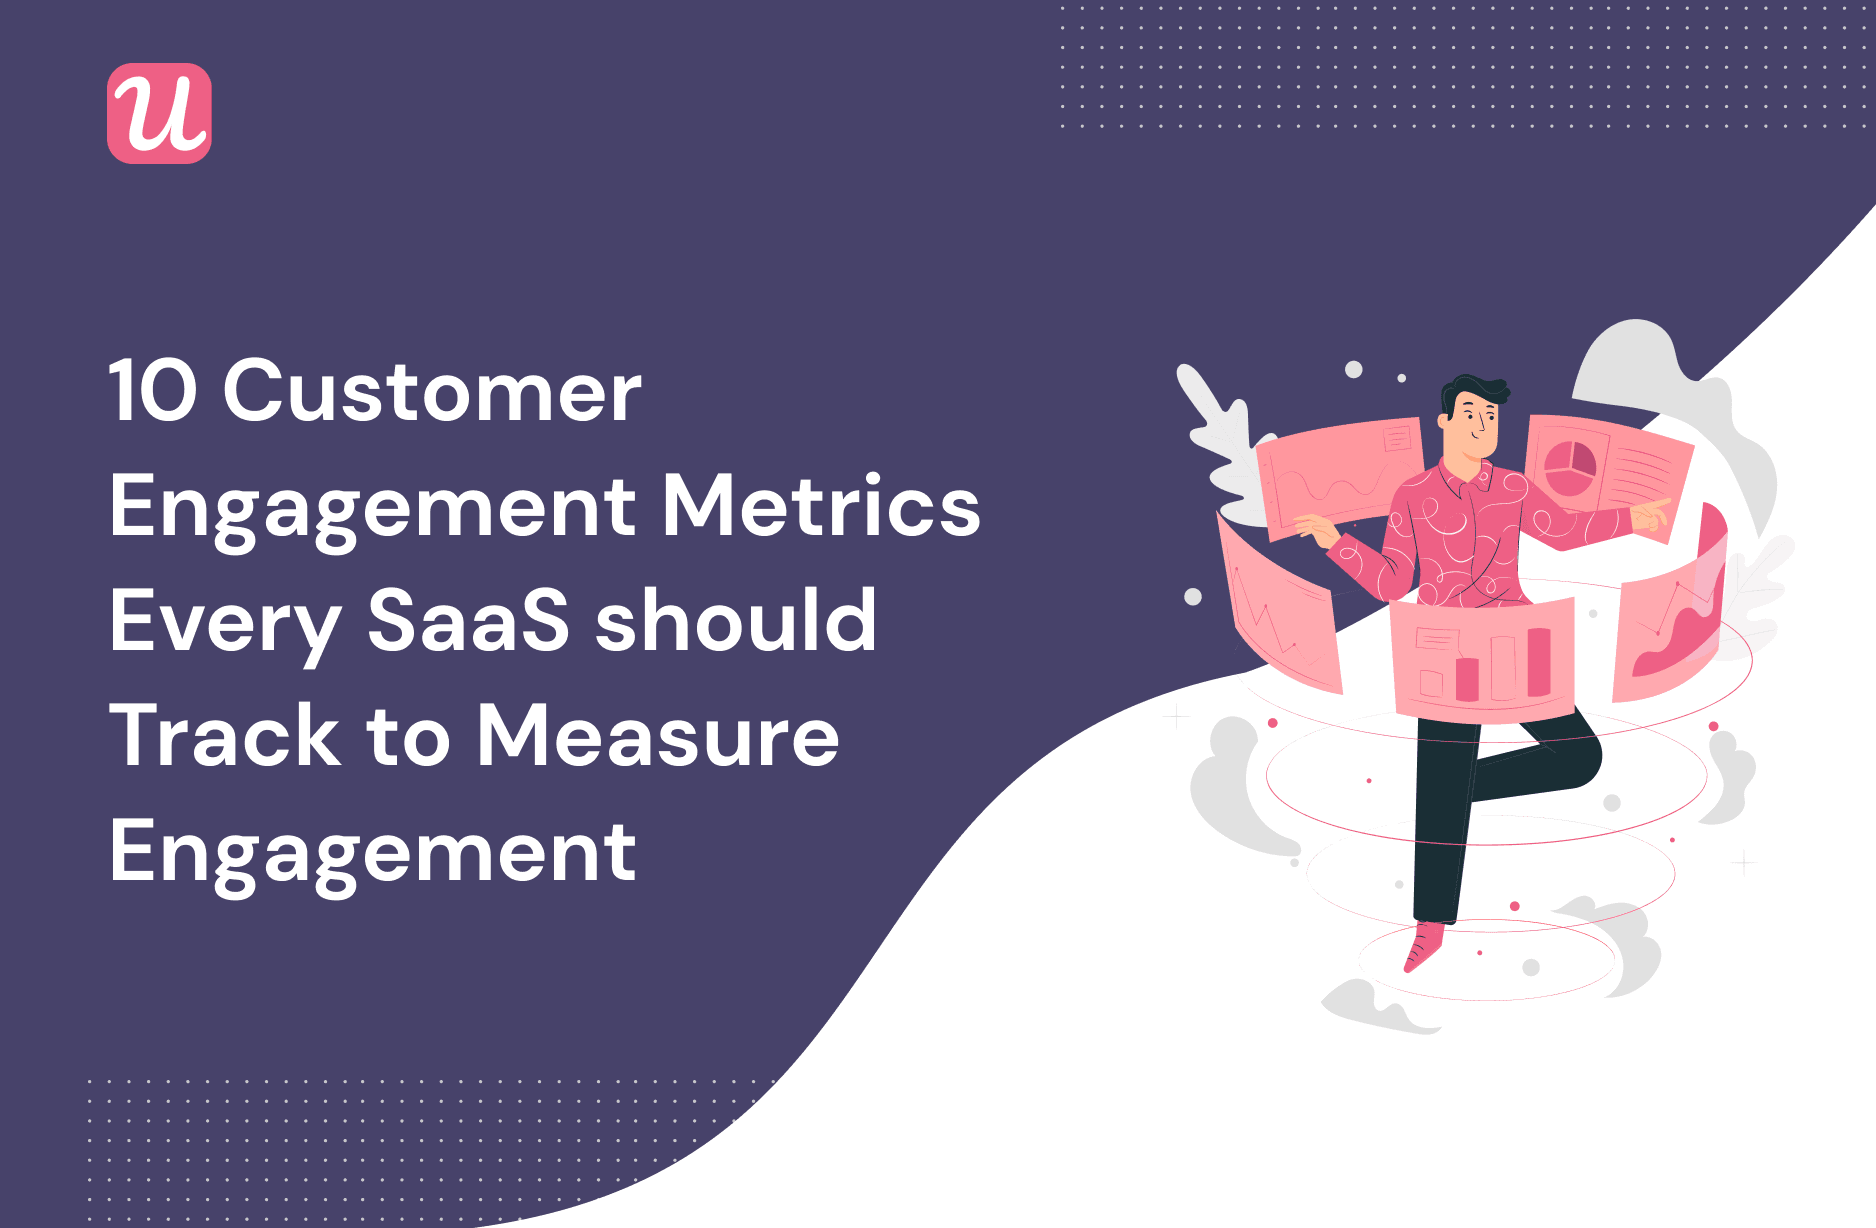 10 Customer Engagement Metrics Every SaaS Should Track To Measure Engagement